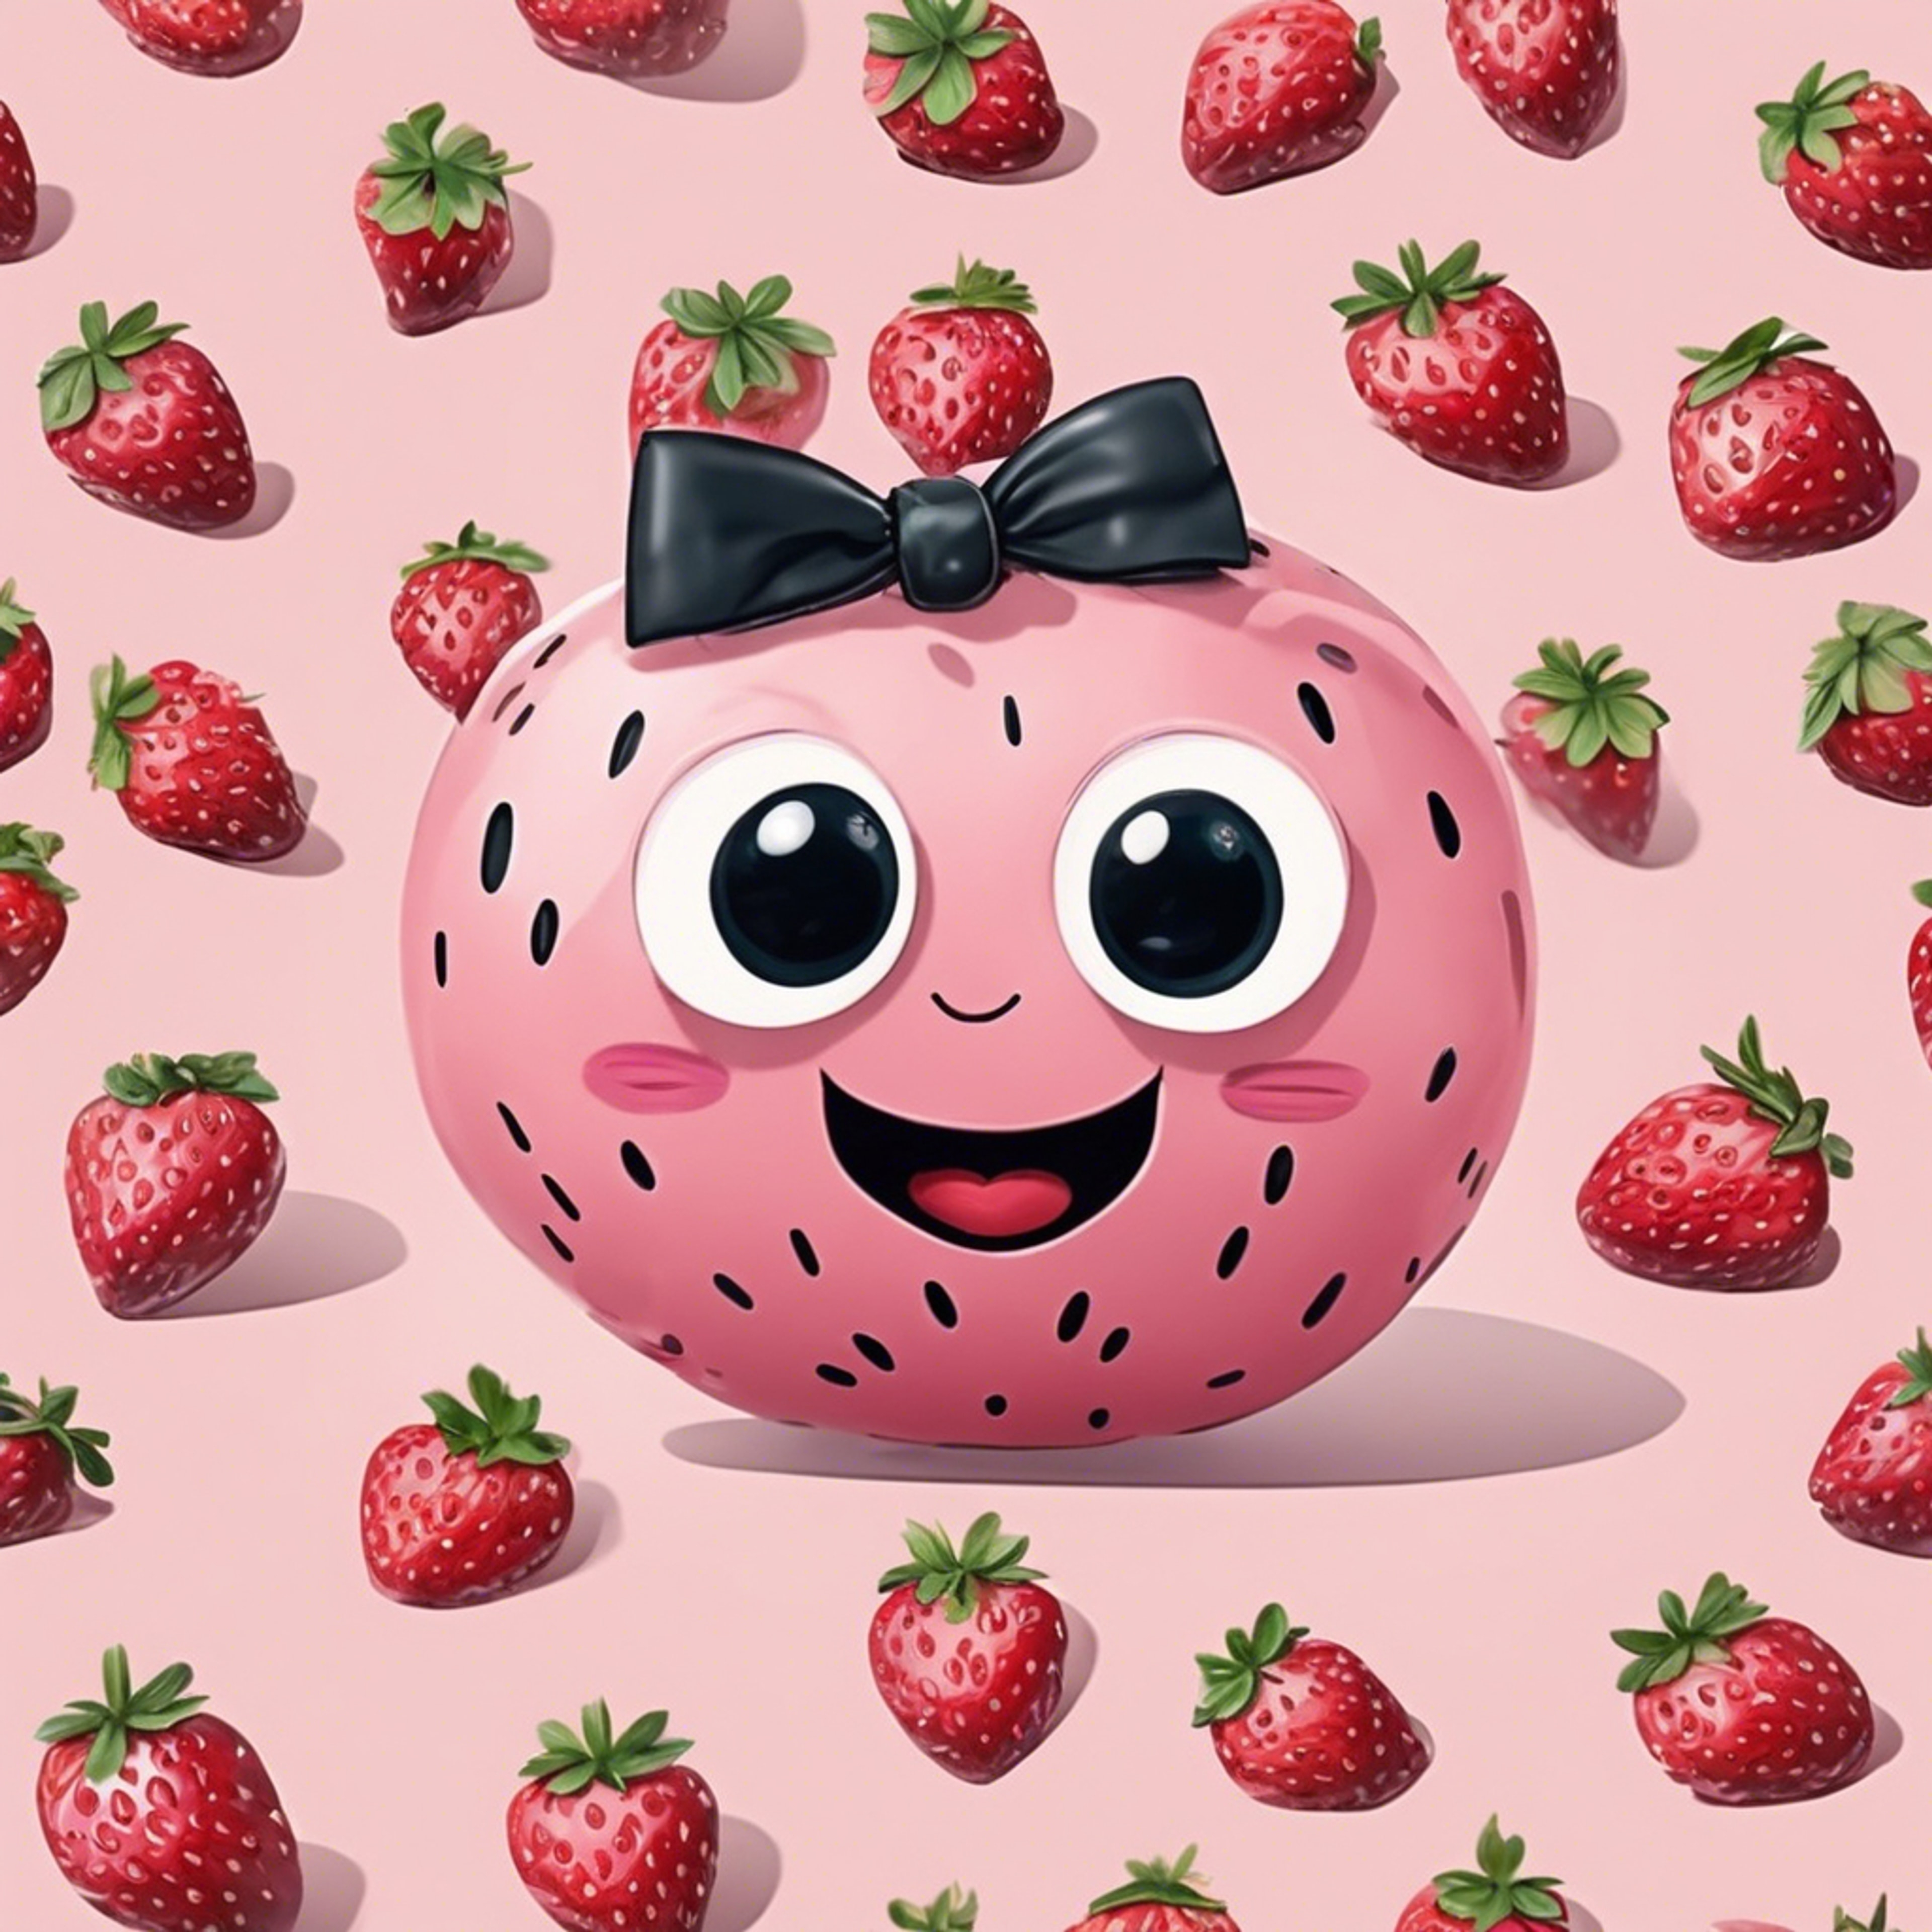 Cute, smiling light pink kawaii strawberries with big eyes and little bow ties. Hintergrund[24a5e2efca874b08b7f4]